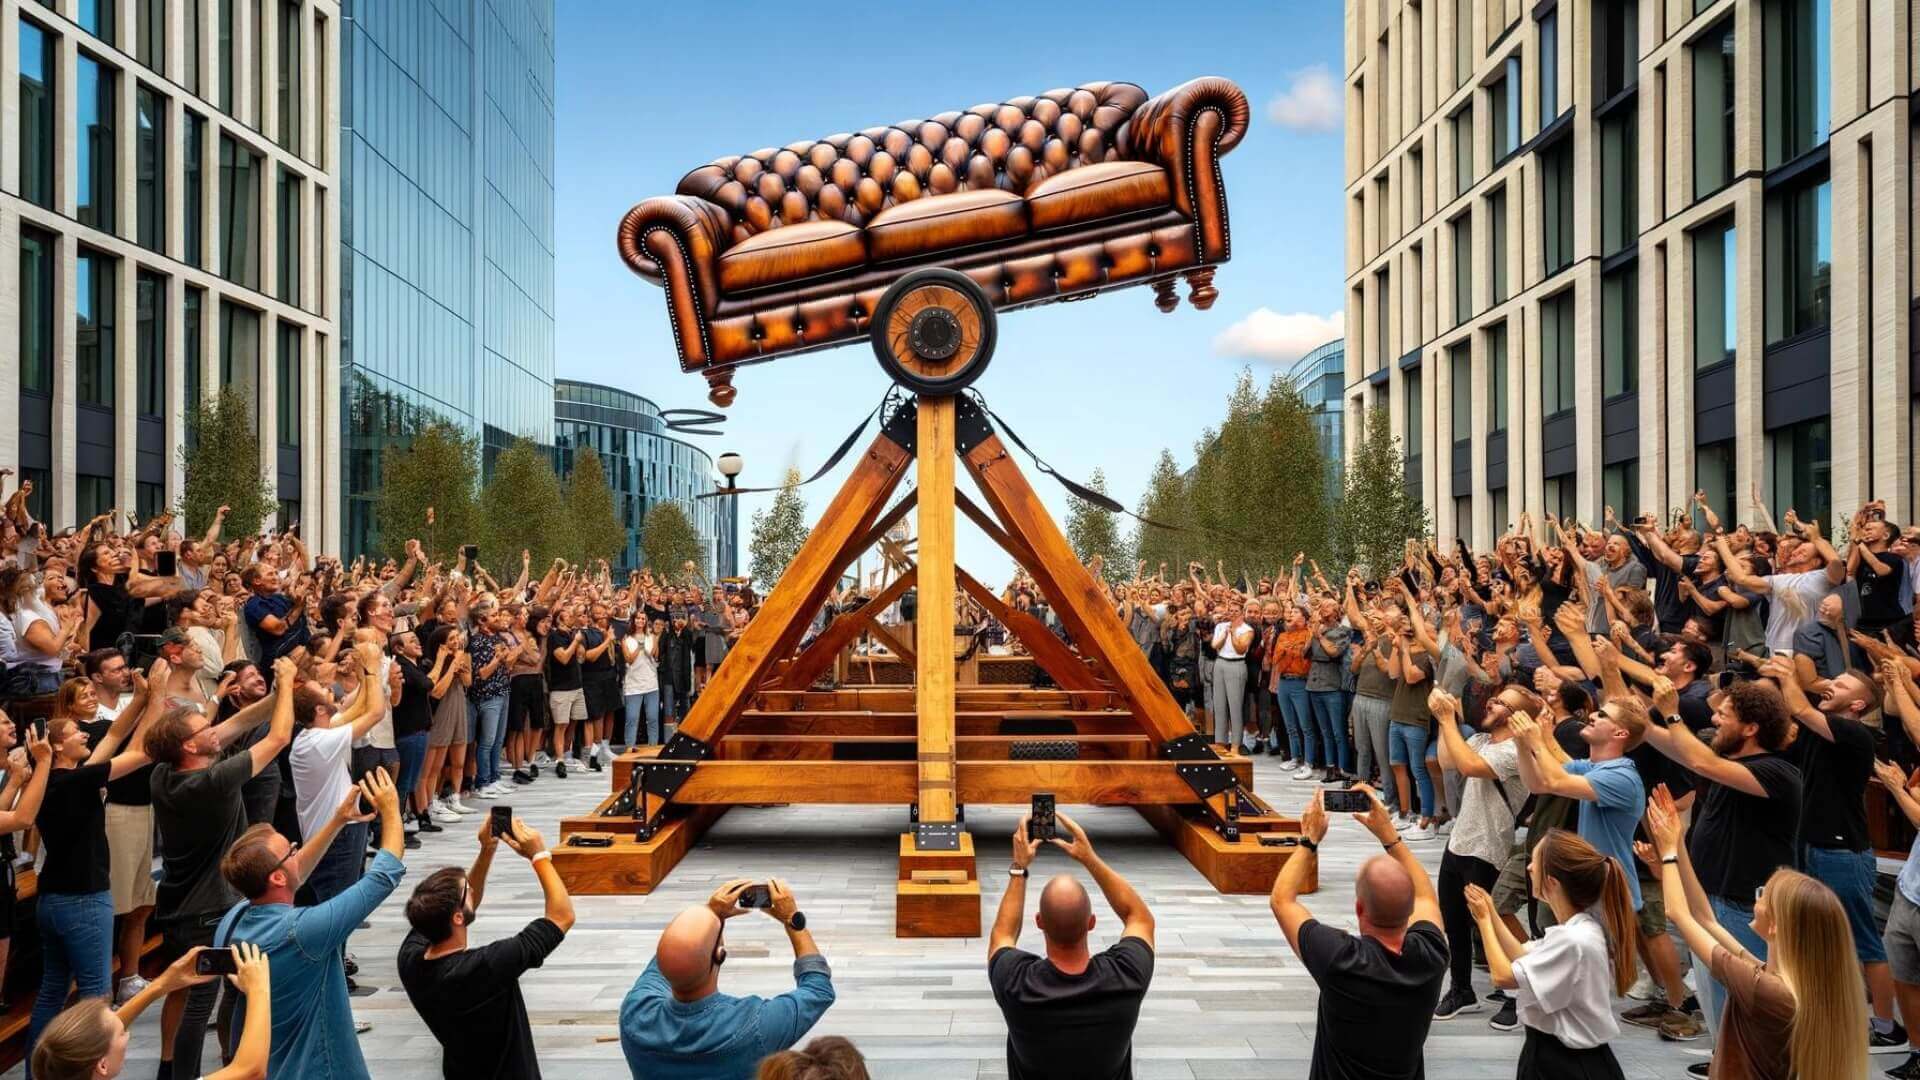 a leather couch launched from a trebuchet as a crowd smiles and snaps photos